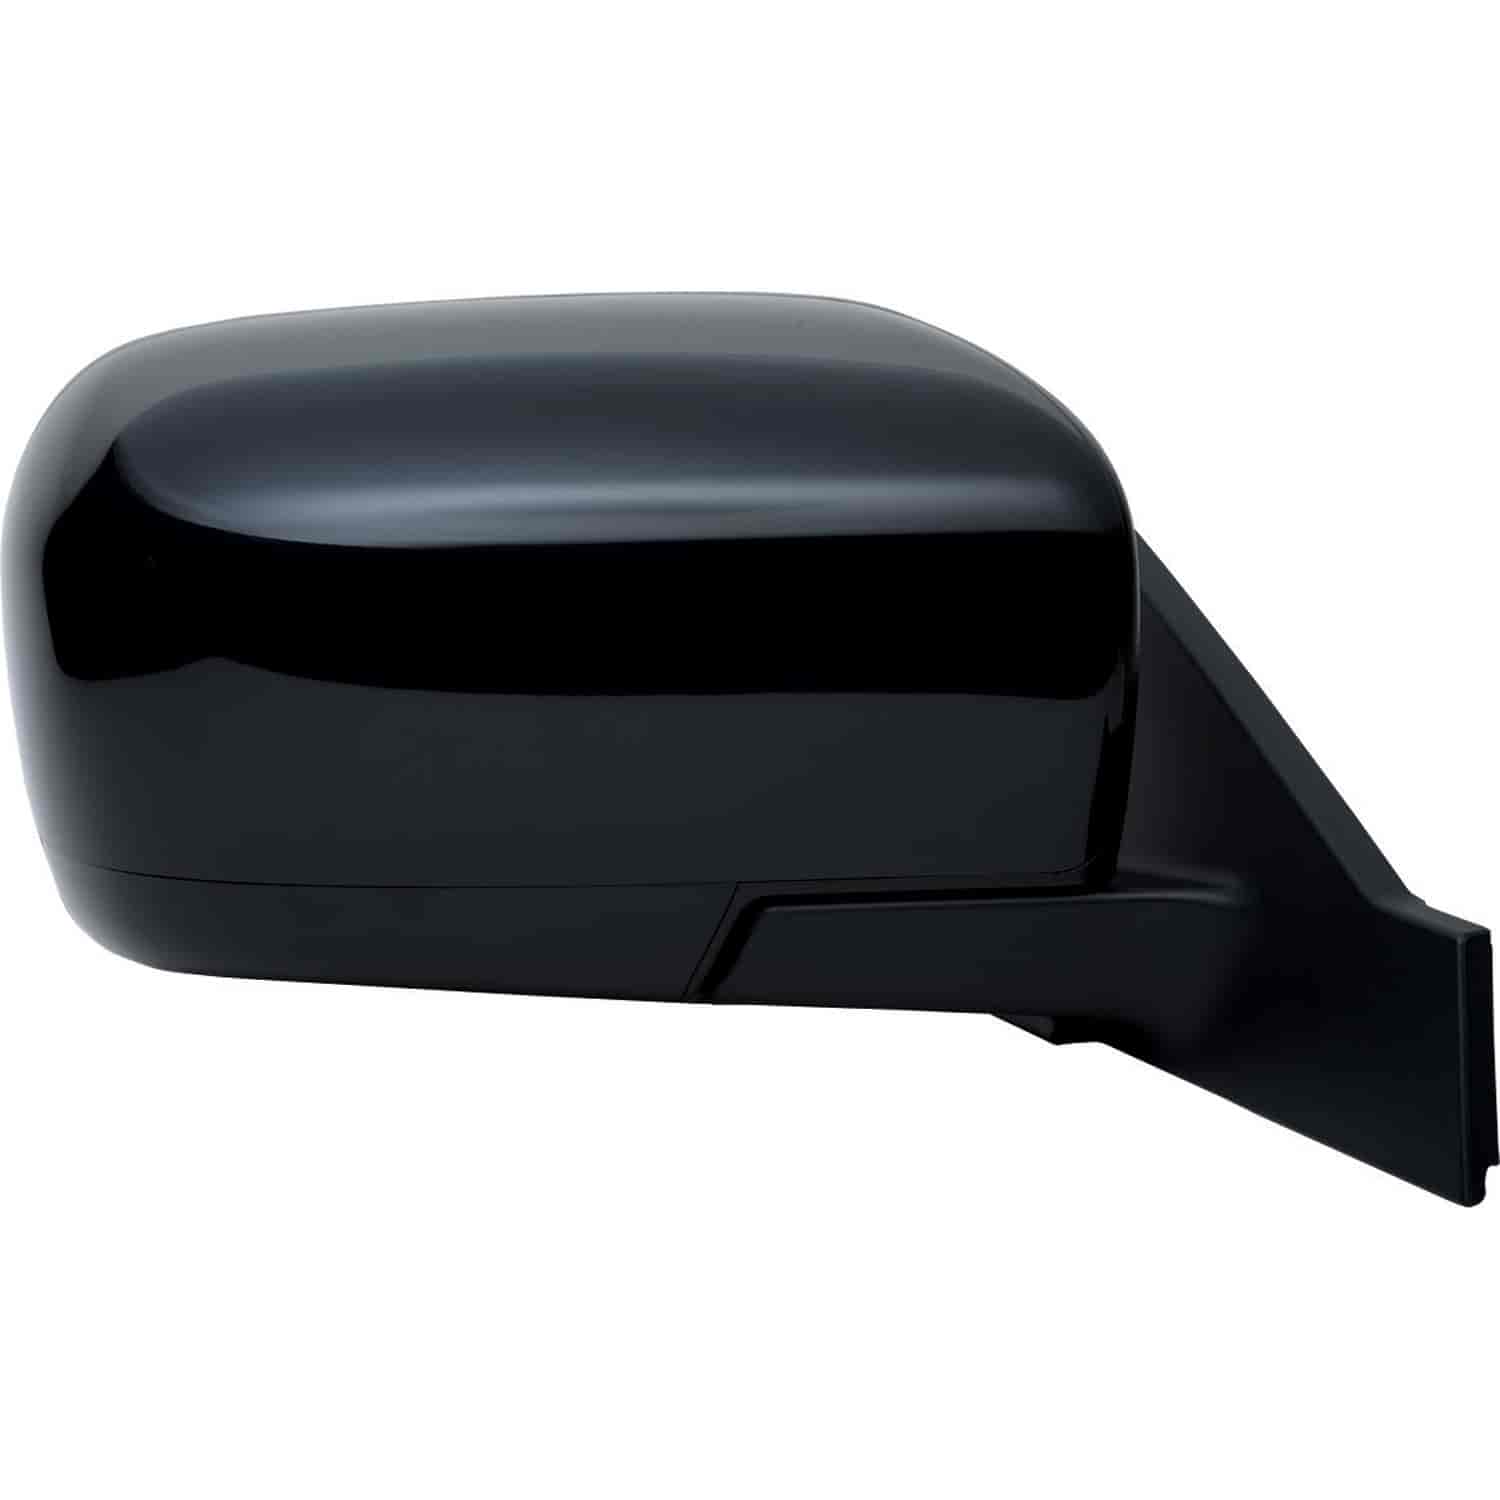 OEM Style Replacement mirror for 06-09 Mazda 5 passenger side mirror tested to fit and function like